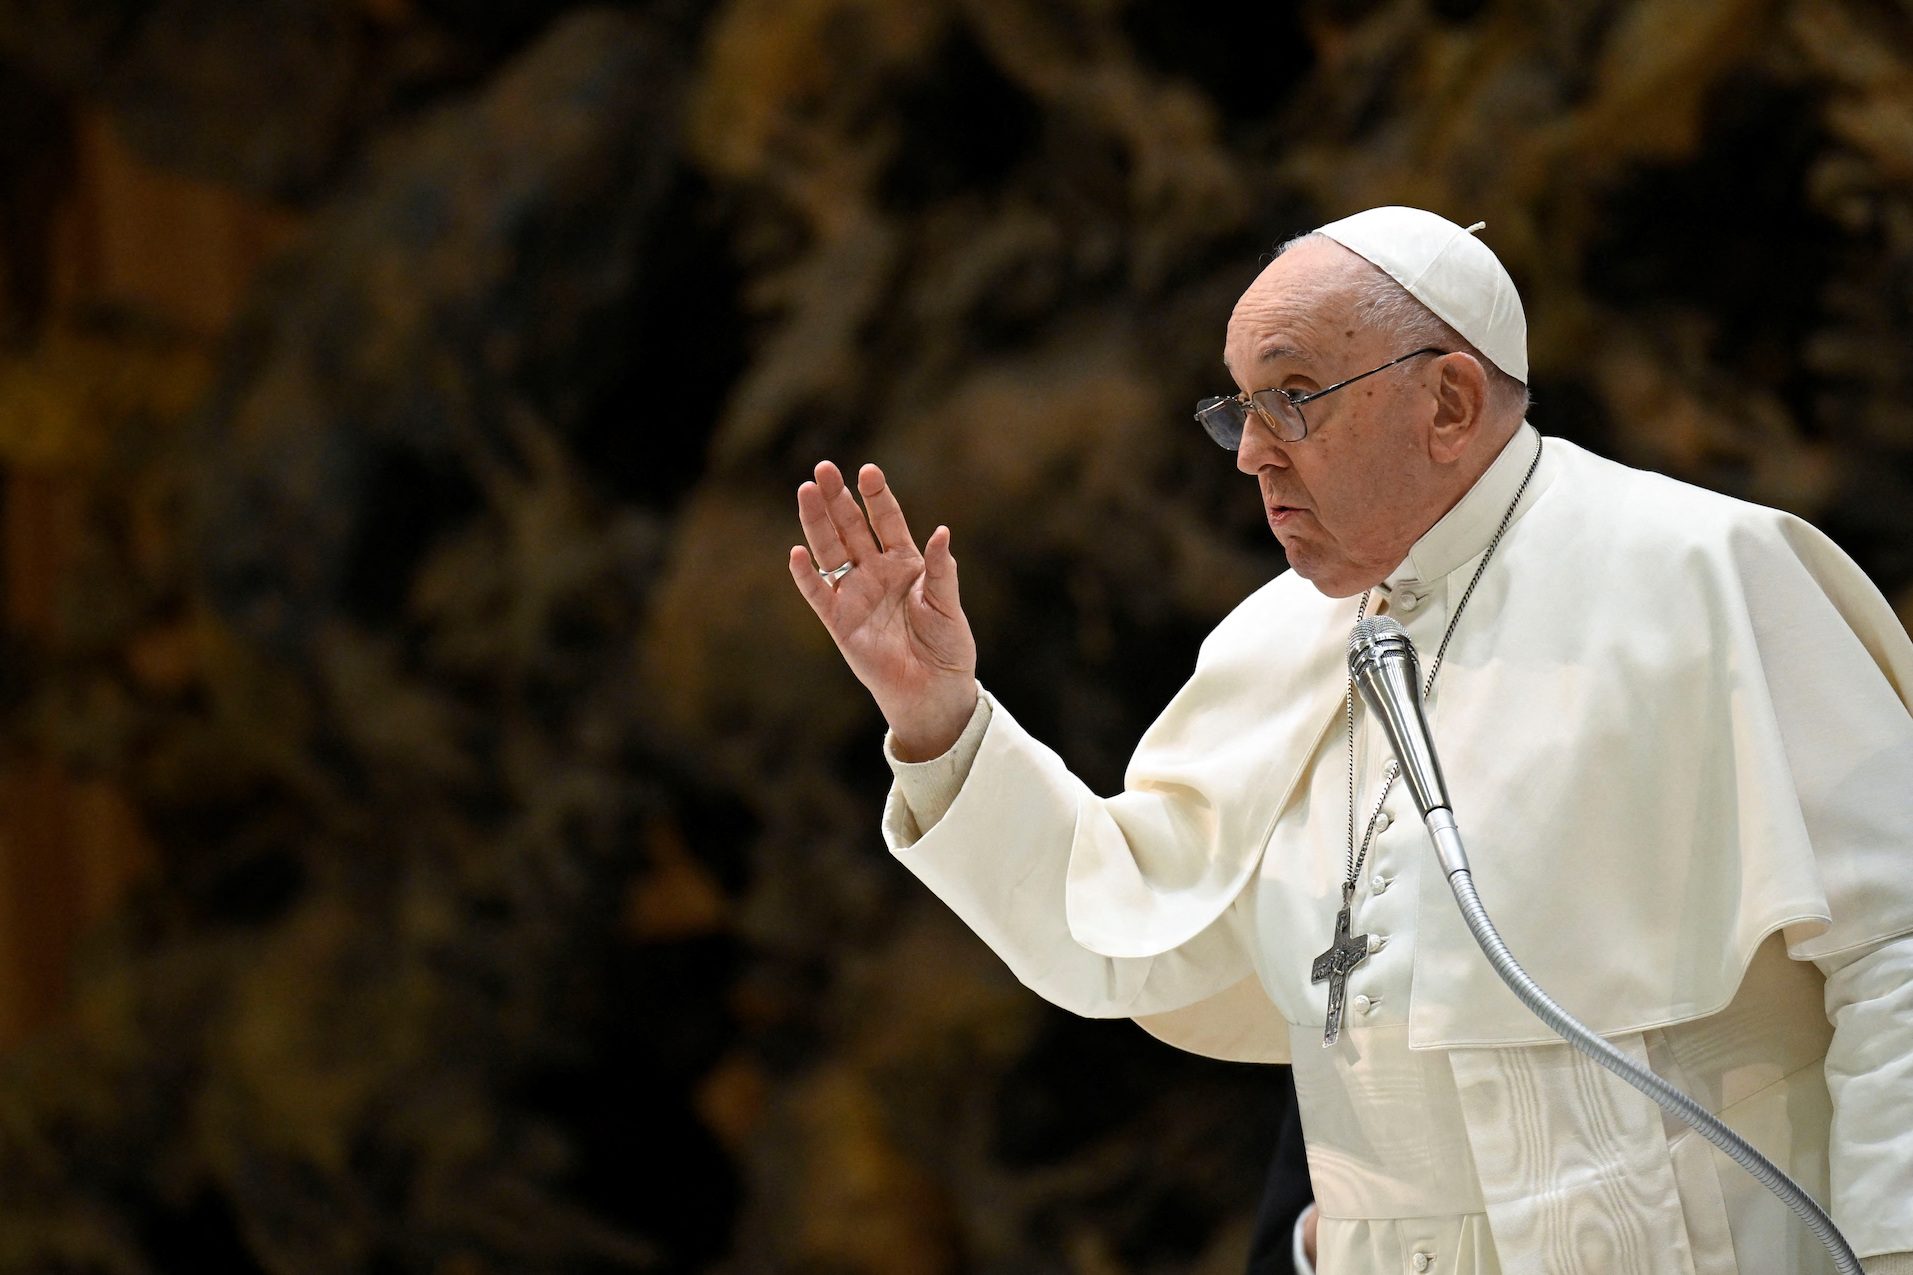 Pope Francis says climate change ‘a road to death,’ deniers ‘foolish’